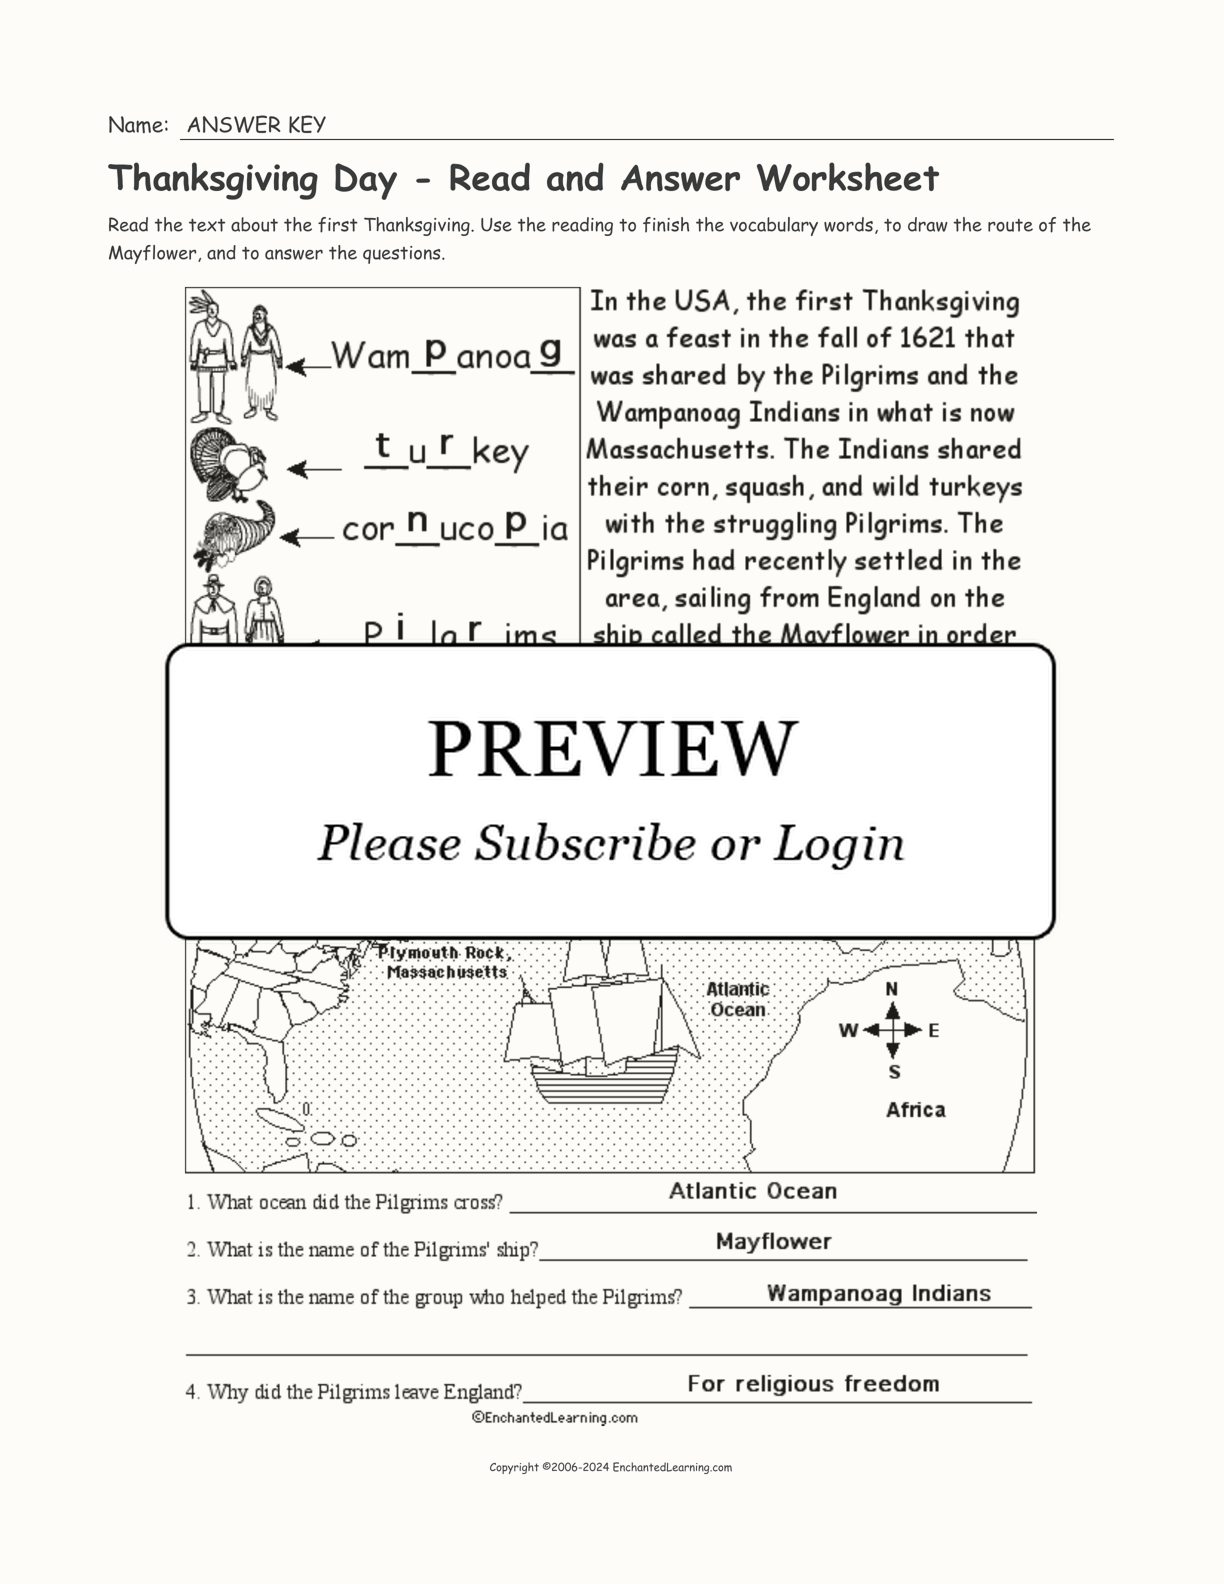 Thanksgiving Day - Read and Answer Worksheet interactive worksheet page 2